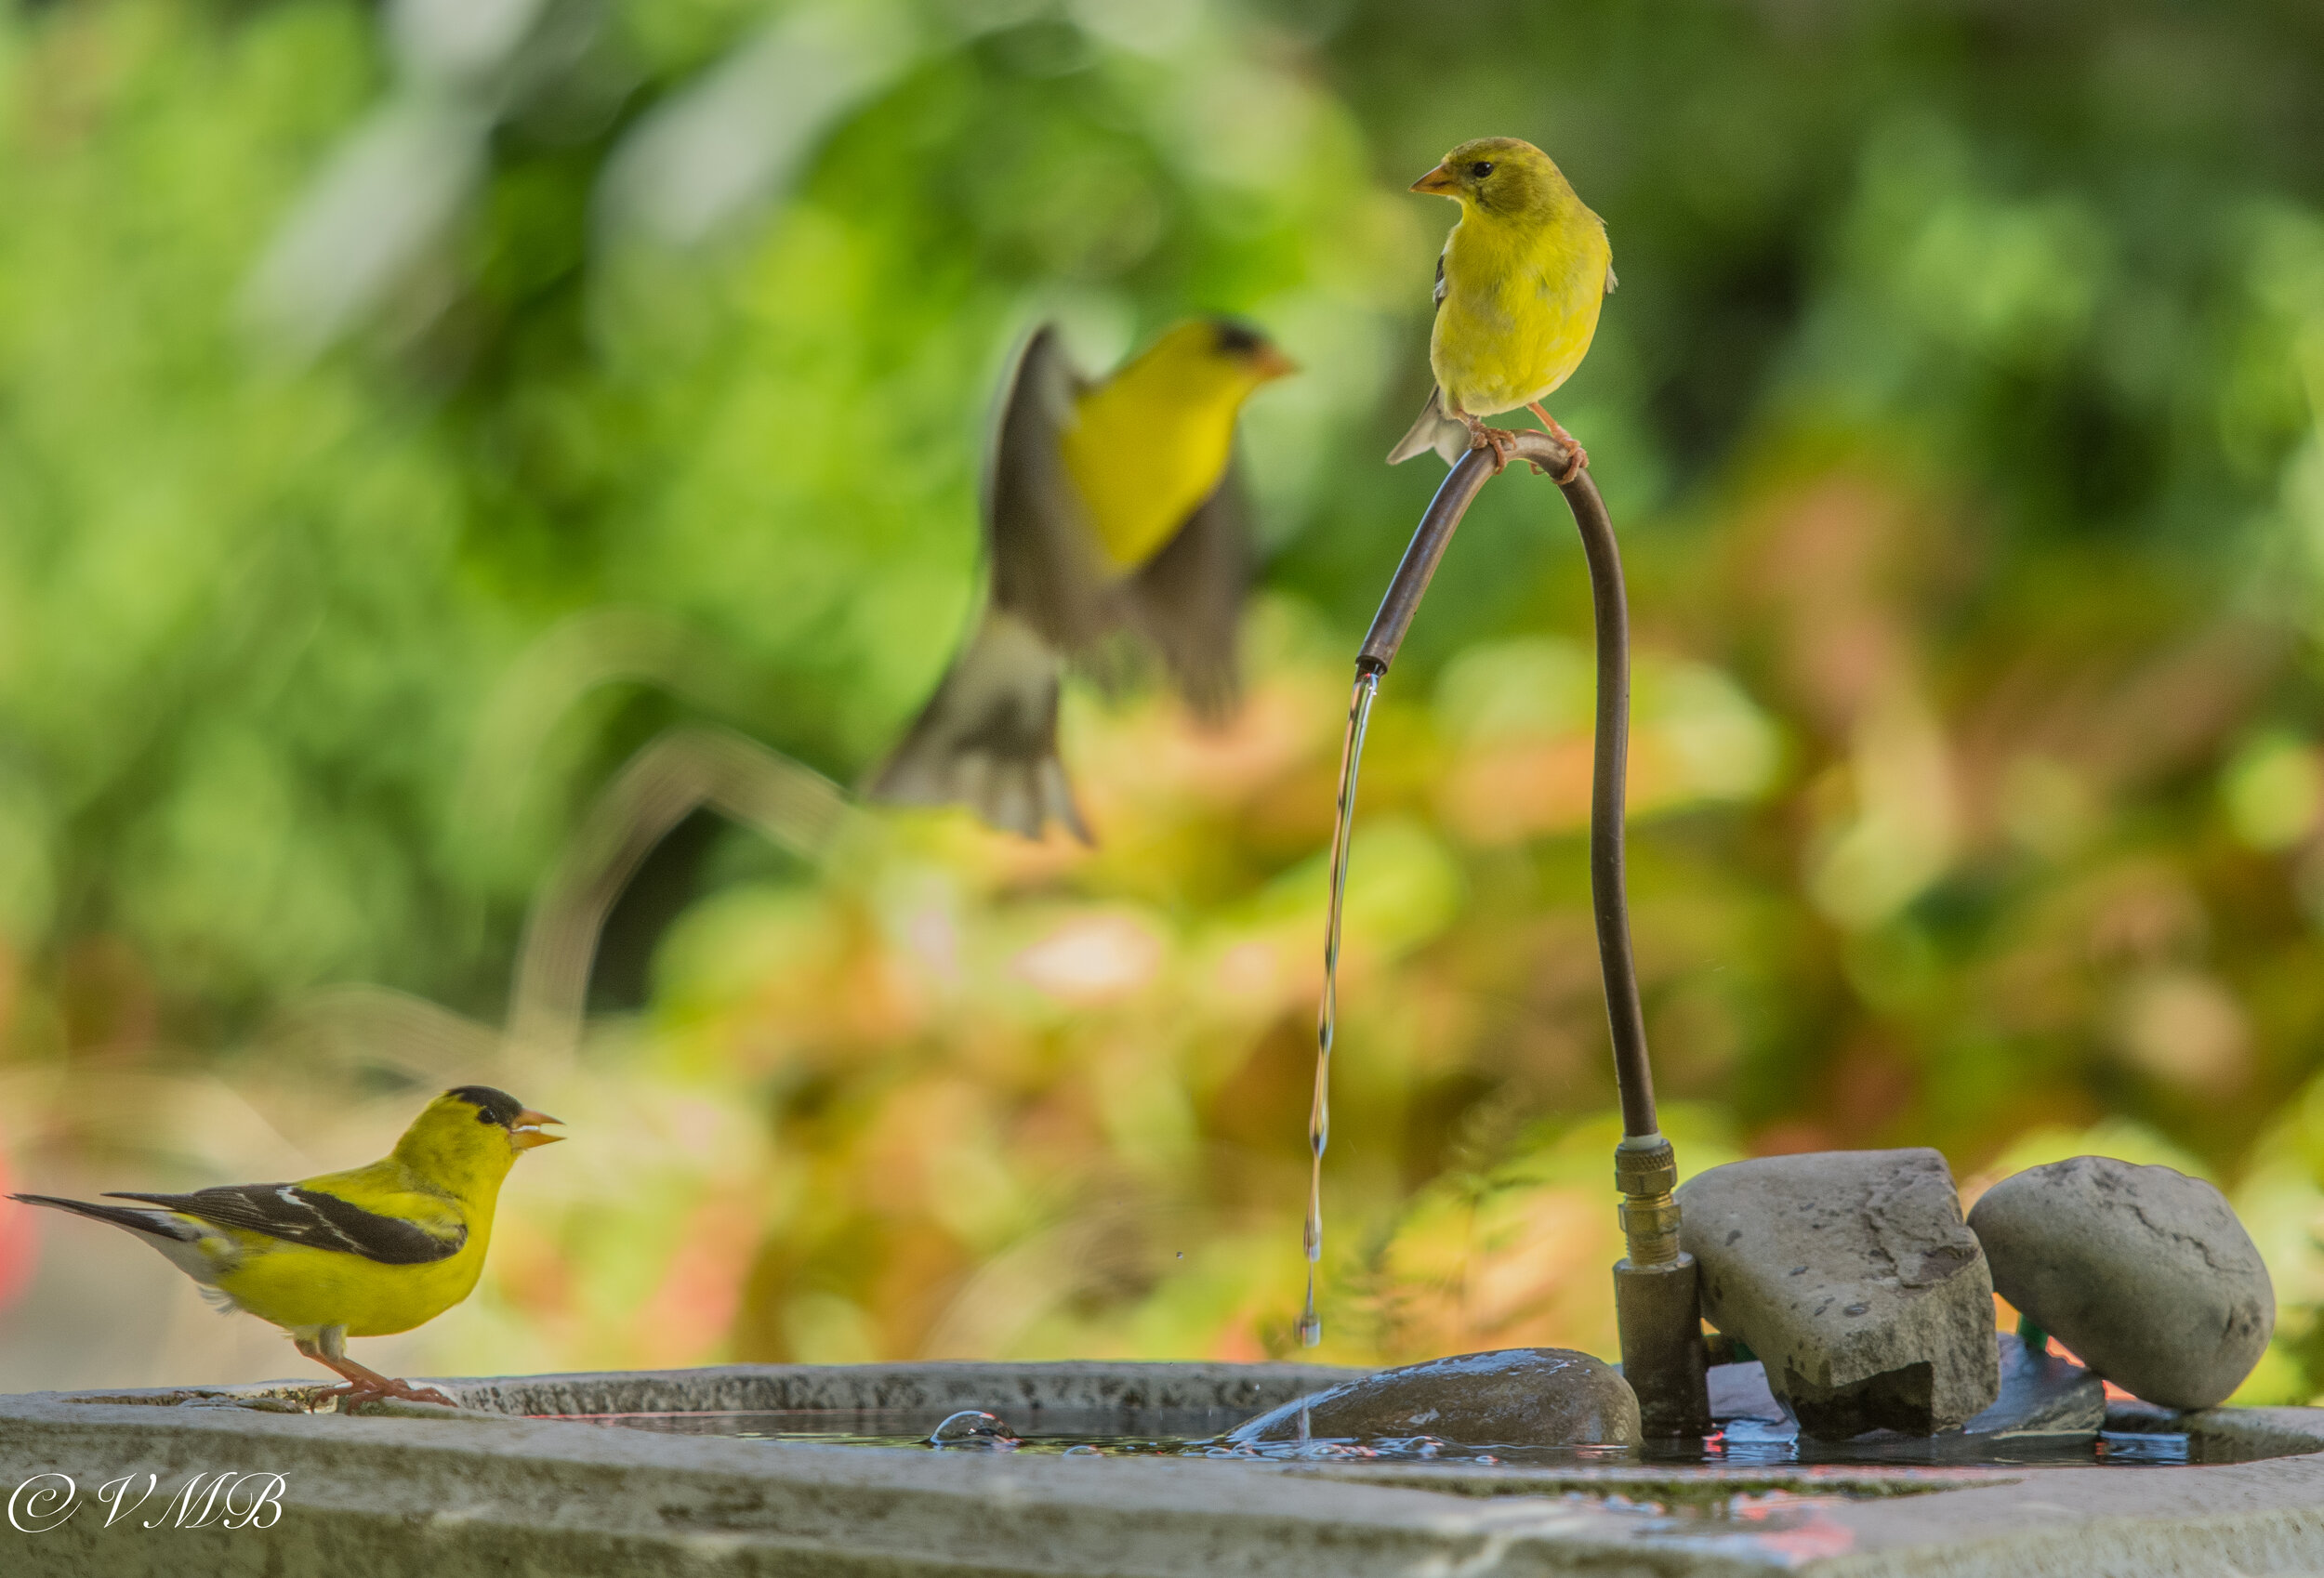 The converted dripper that operates as a solar-powered recirculating pump is certainly a treat for the Goldfinches in the garden.